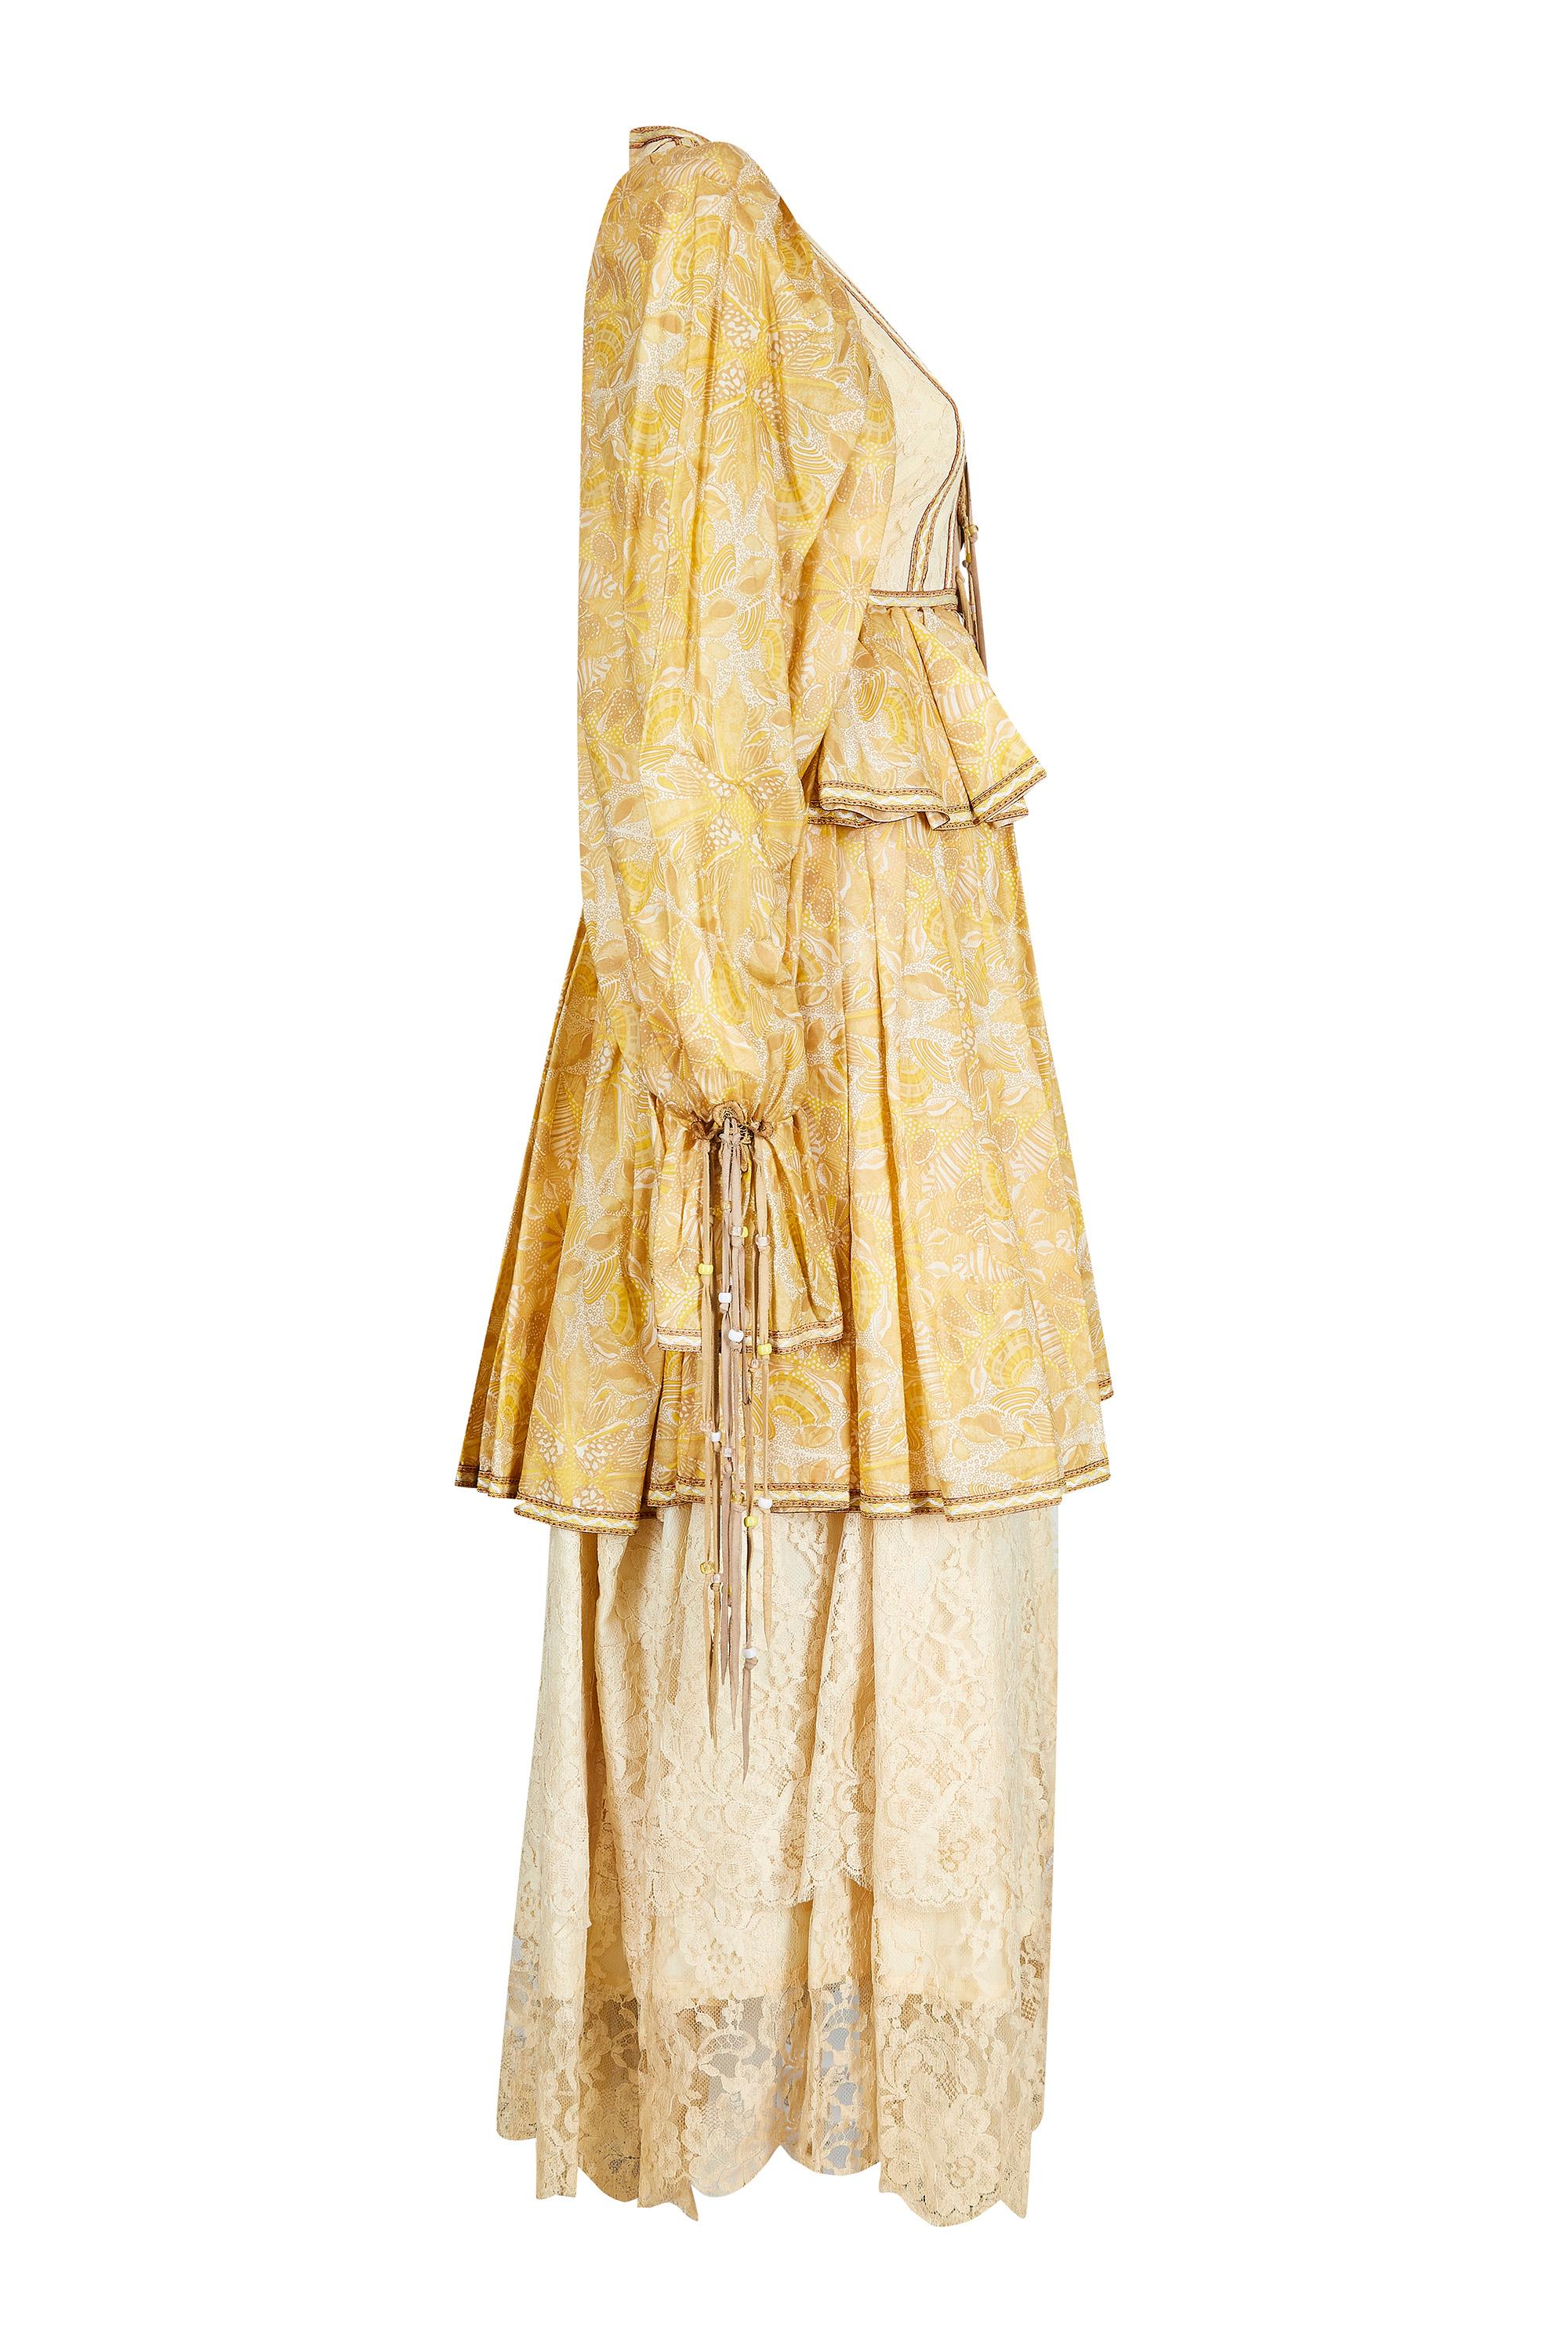 This incredible 1970s peasant style dress with layered skirt and tassel detail is by British designer Bill Gibb, who's work is described as the nearest a British designer ever got to haute couture. This exceptional piece is a wonderful example of